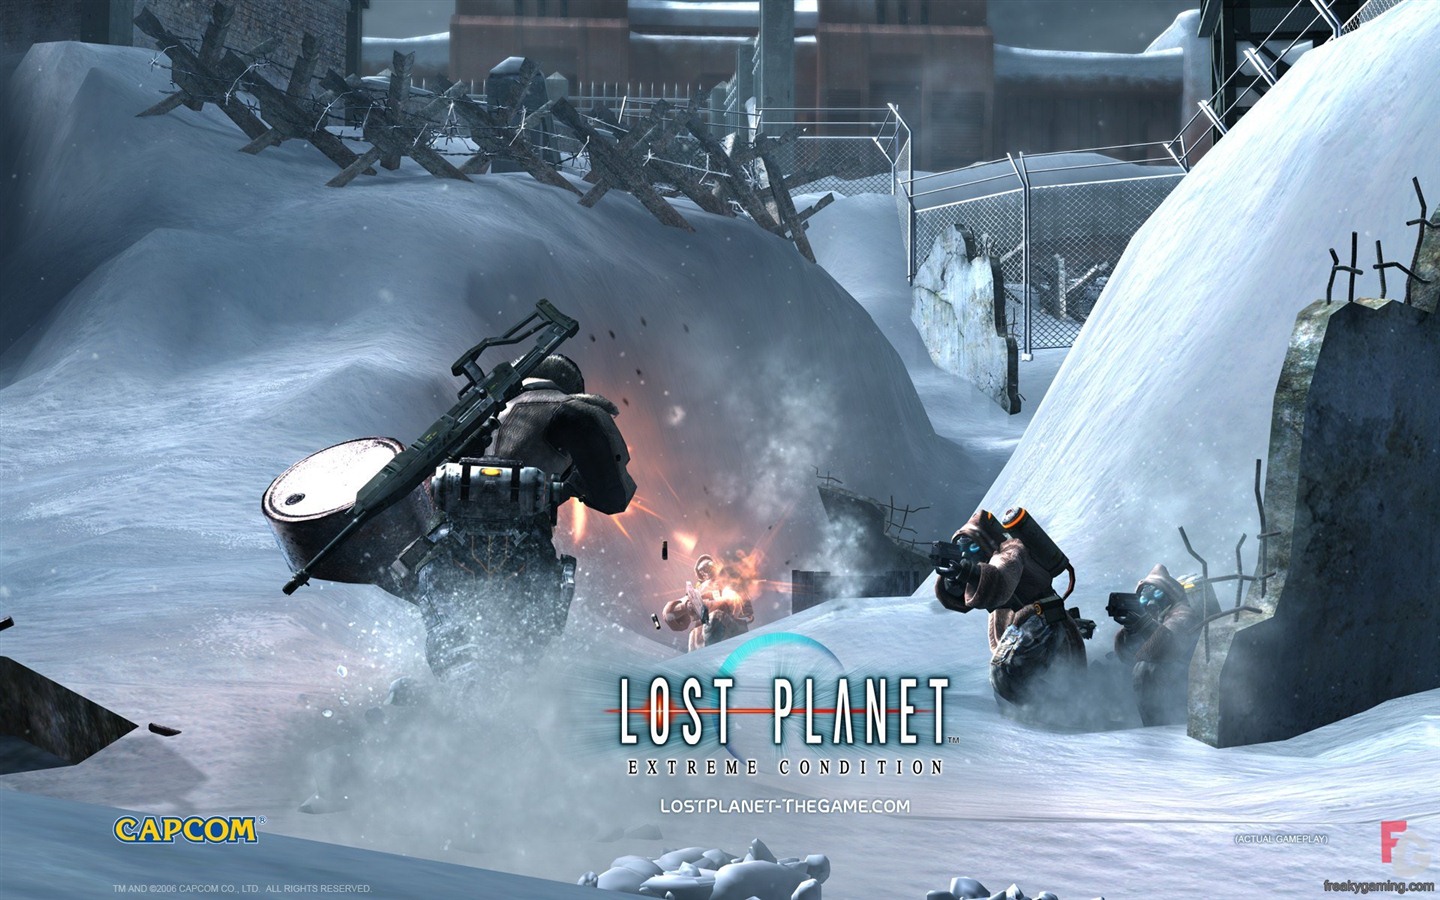 Lost Planet: Extreme Condition HD tapety na plochu #20 - 1440x900